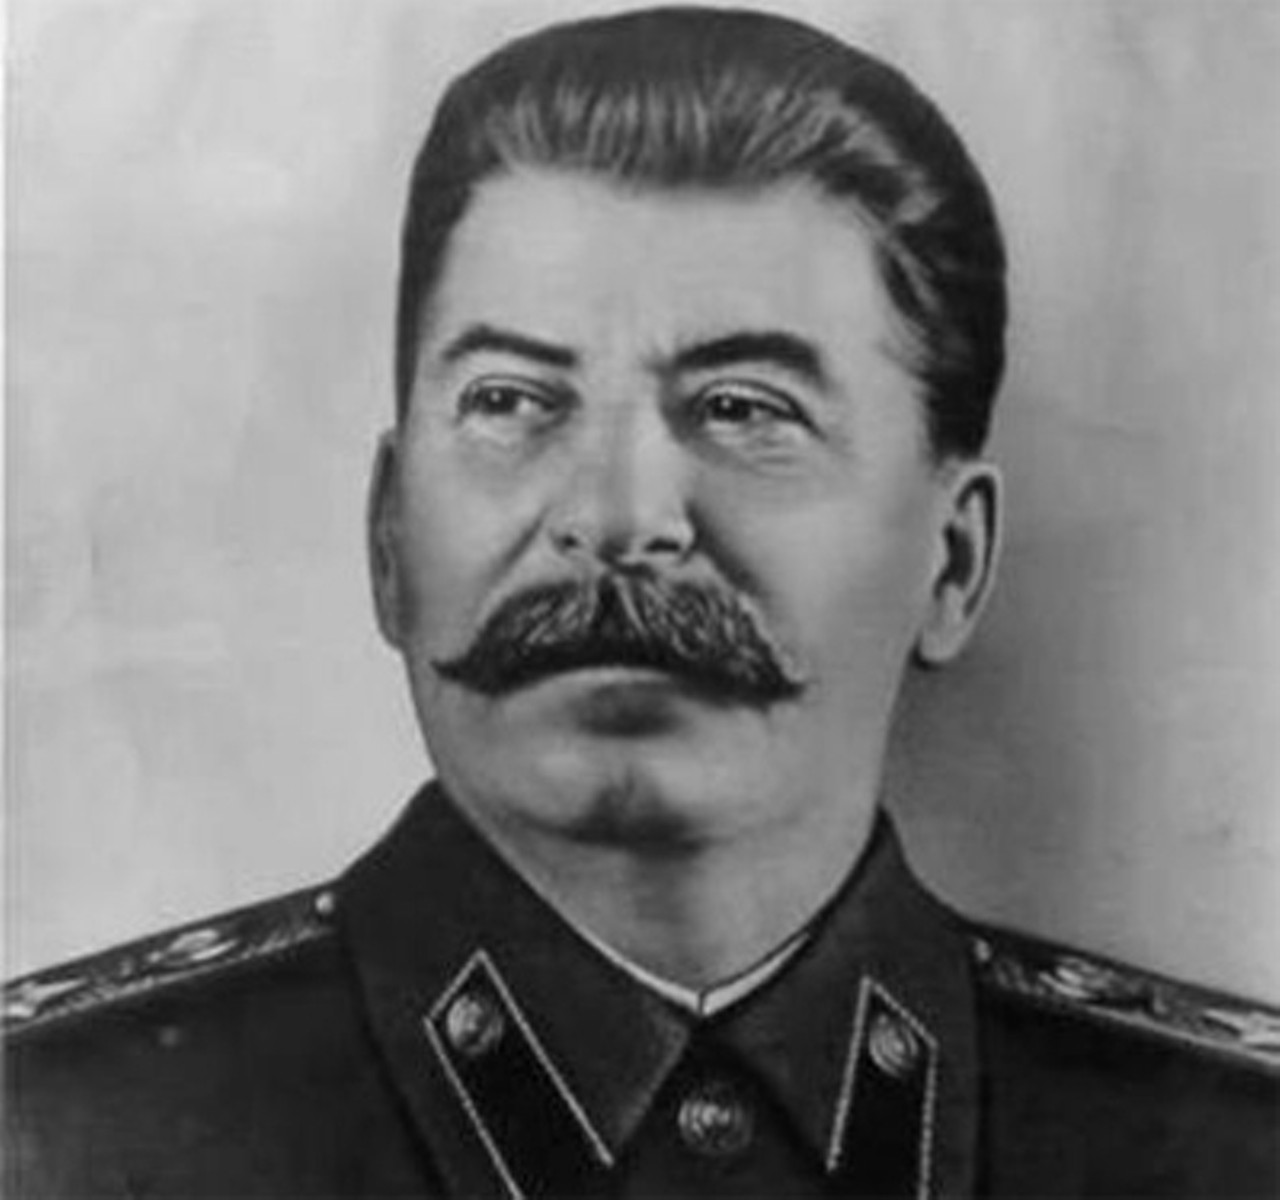 Another dictator, another mustache. Joseph Stalin.